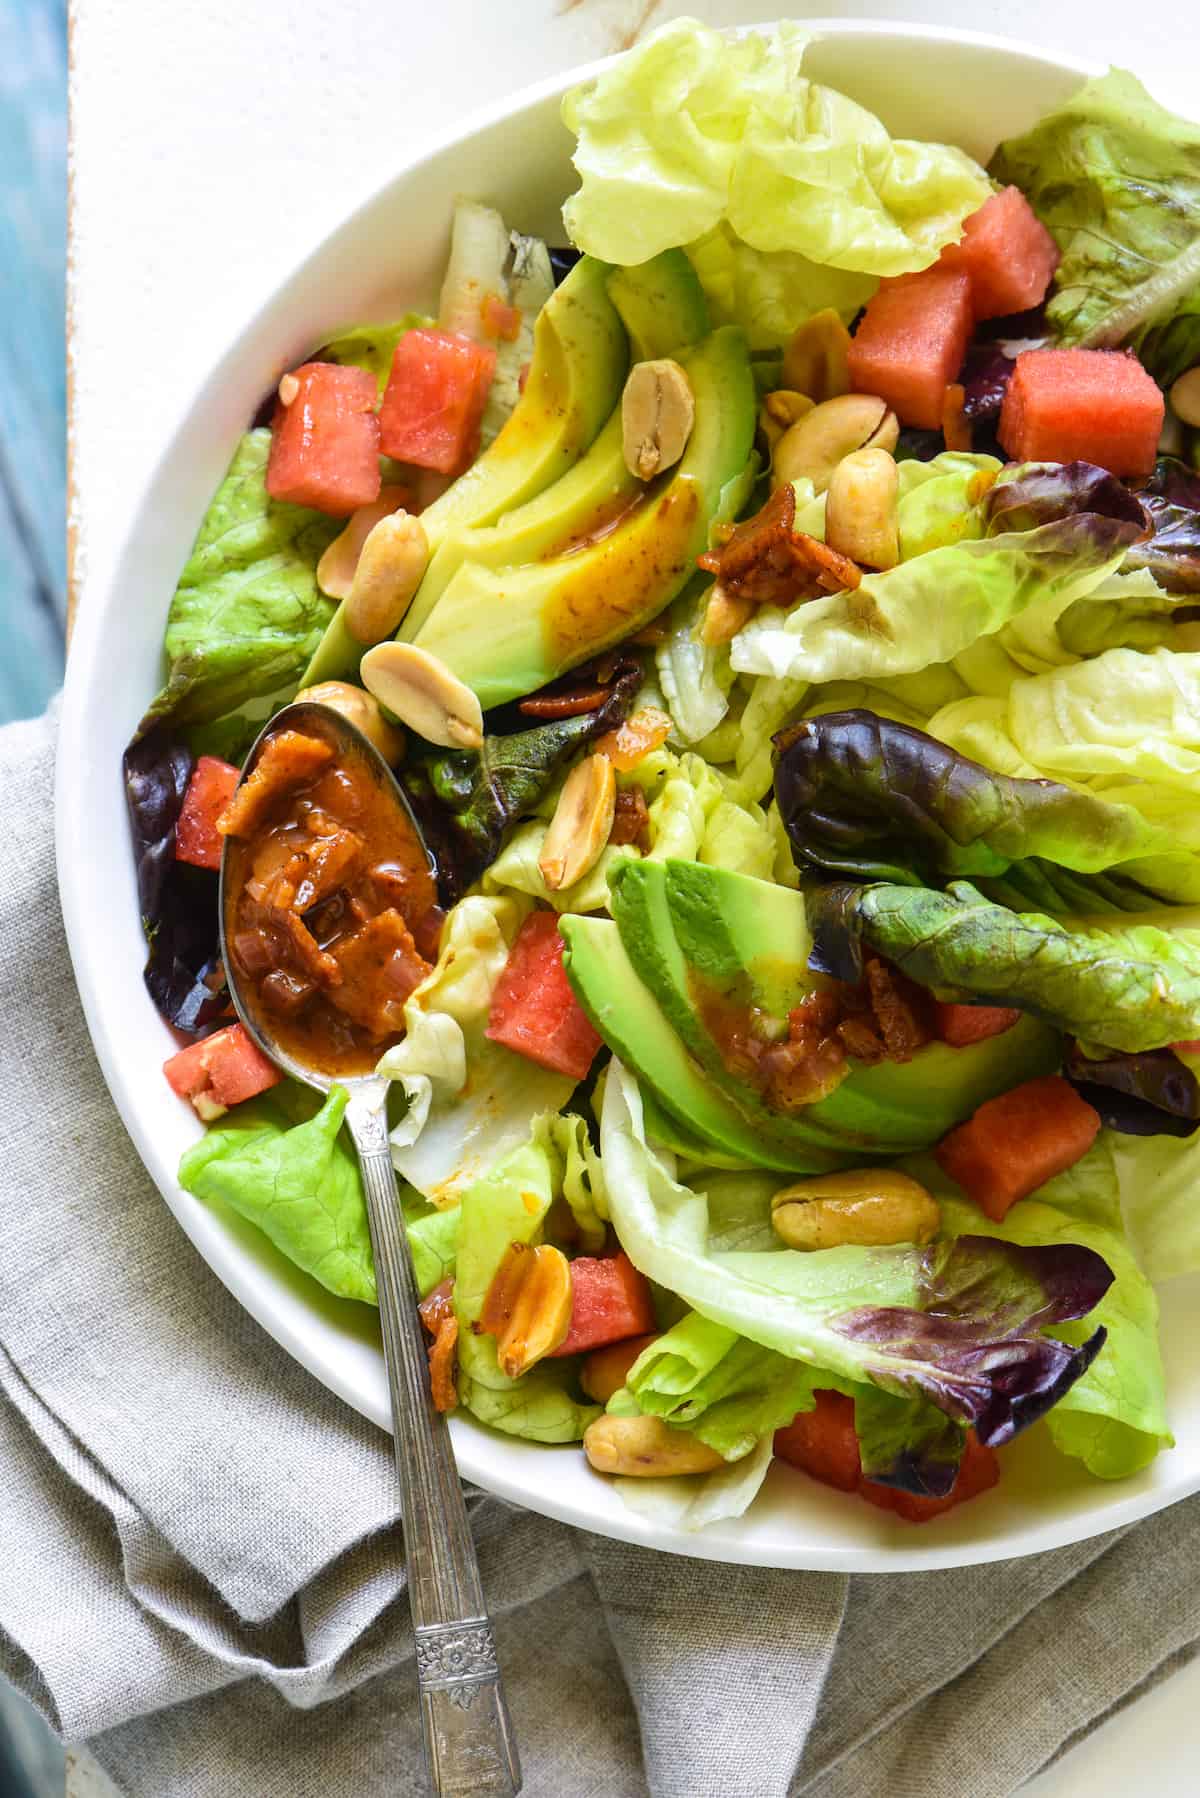 Watermelon and Avocado Salad with Warm Bacon Dressing - An irresistible sweet and savory summer salad! Butter lettuce, watermelon, avocado and peanuts are topped with an easy warm bacon dressing. | foxeslovelemons.com